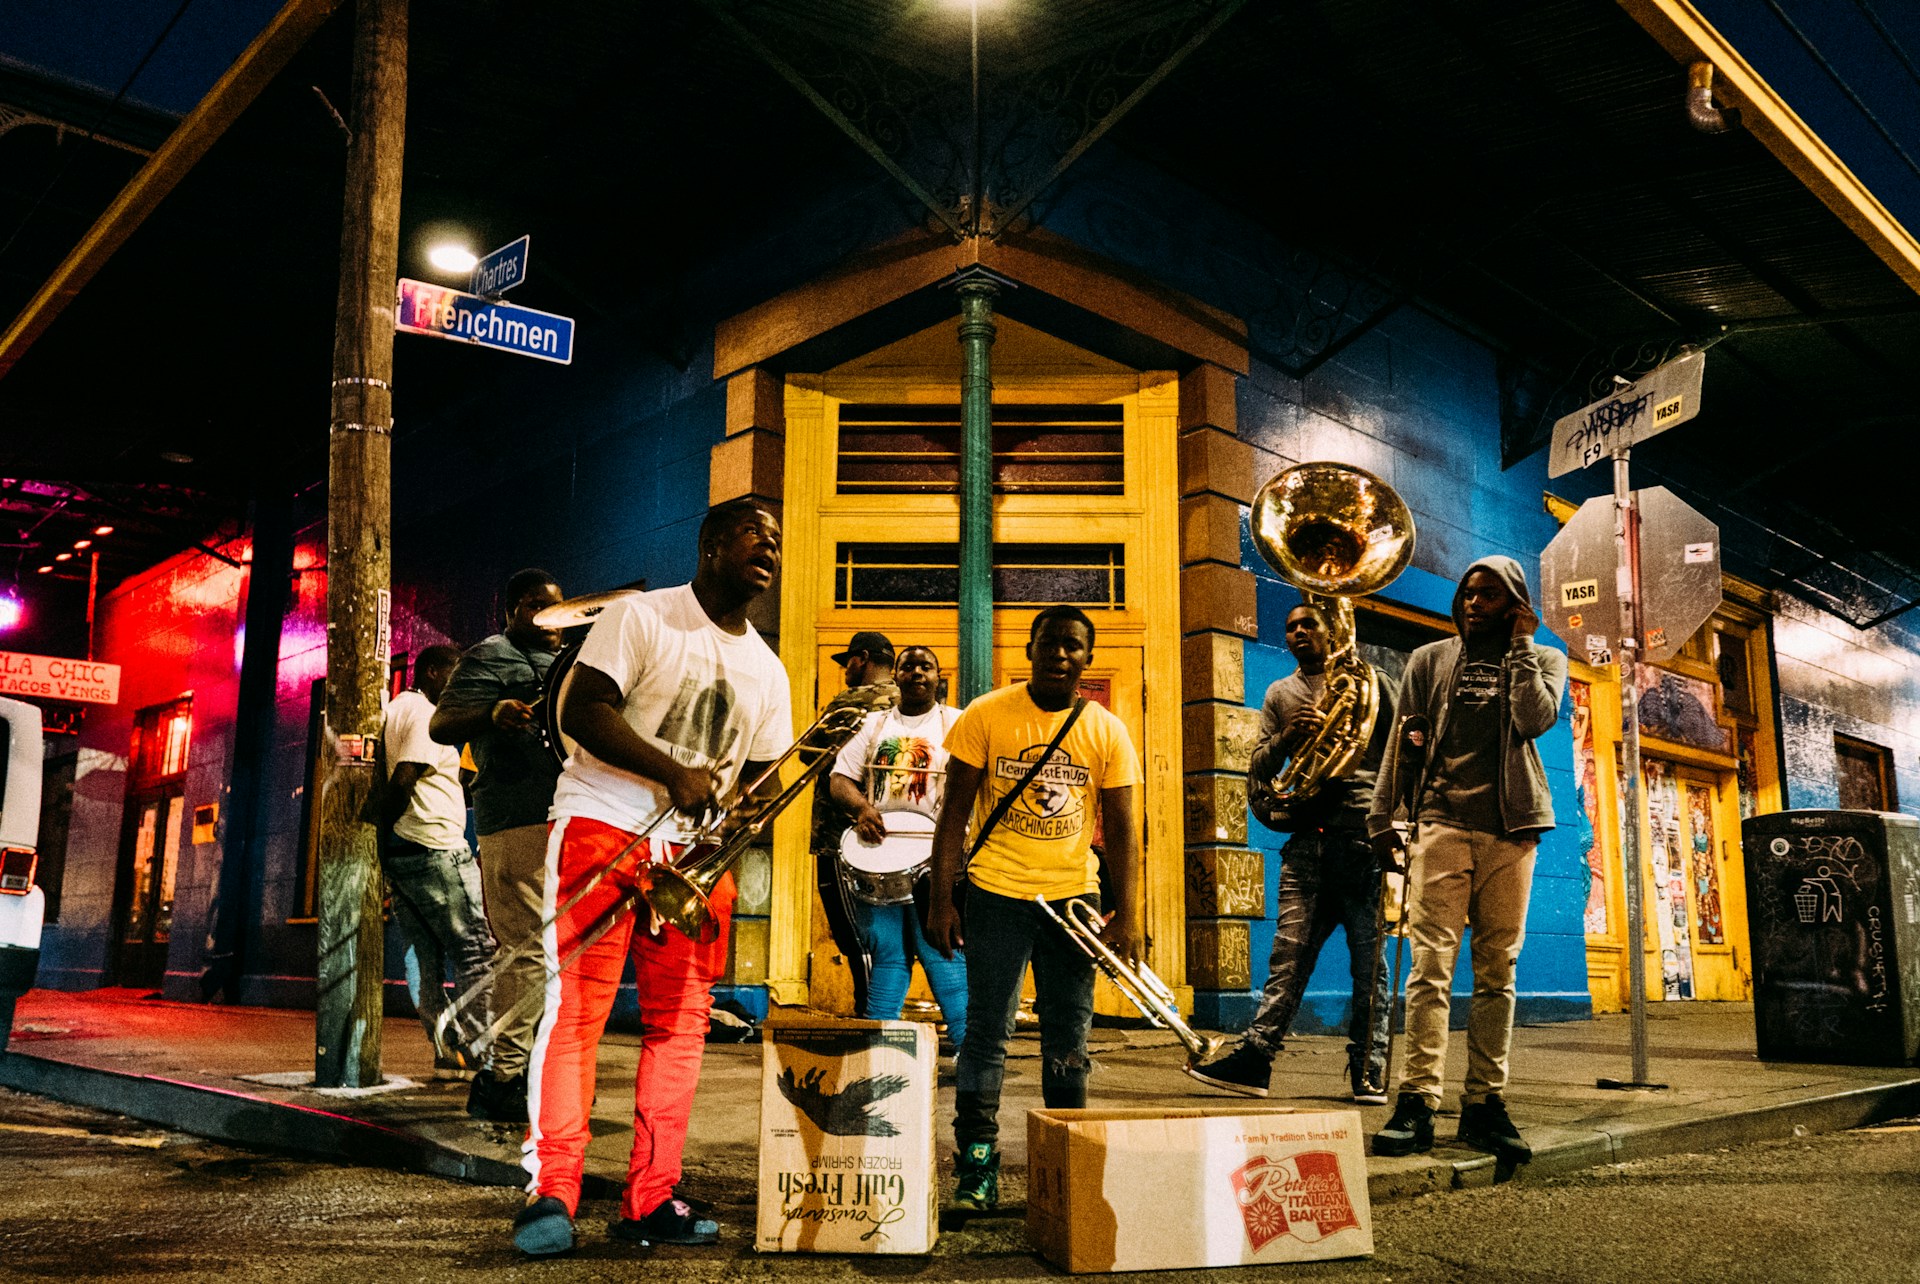 Street musicians in New Orleans.